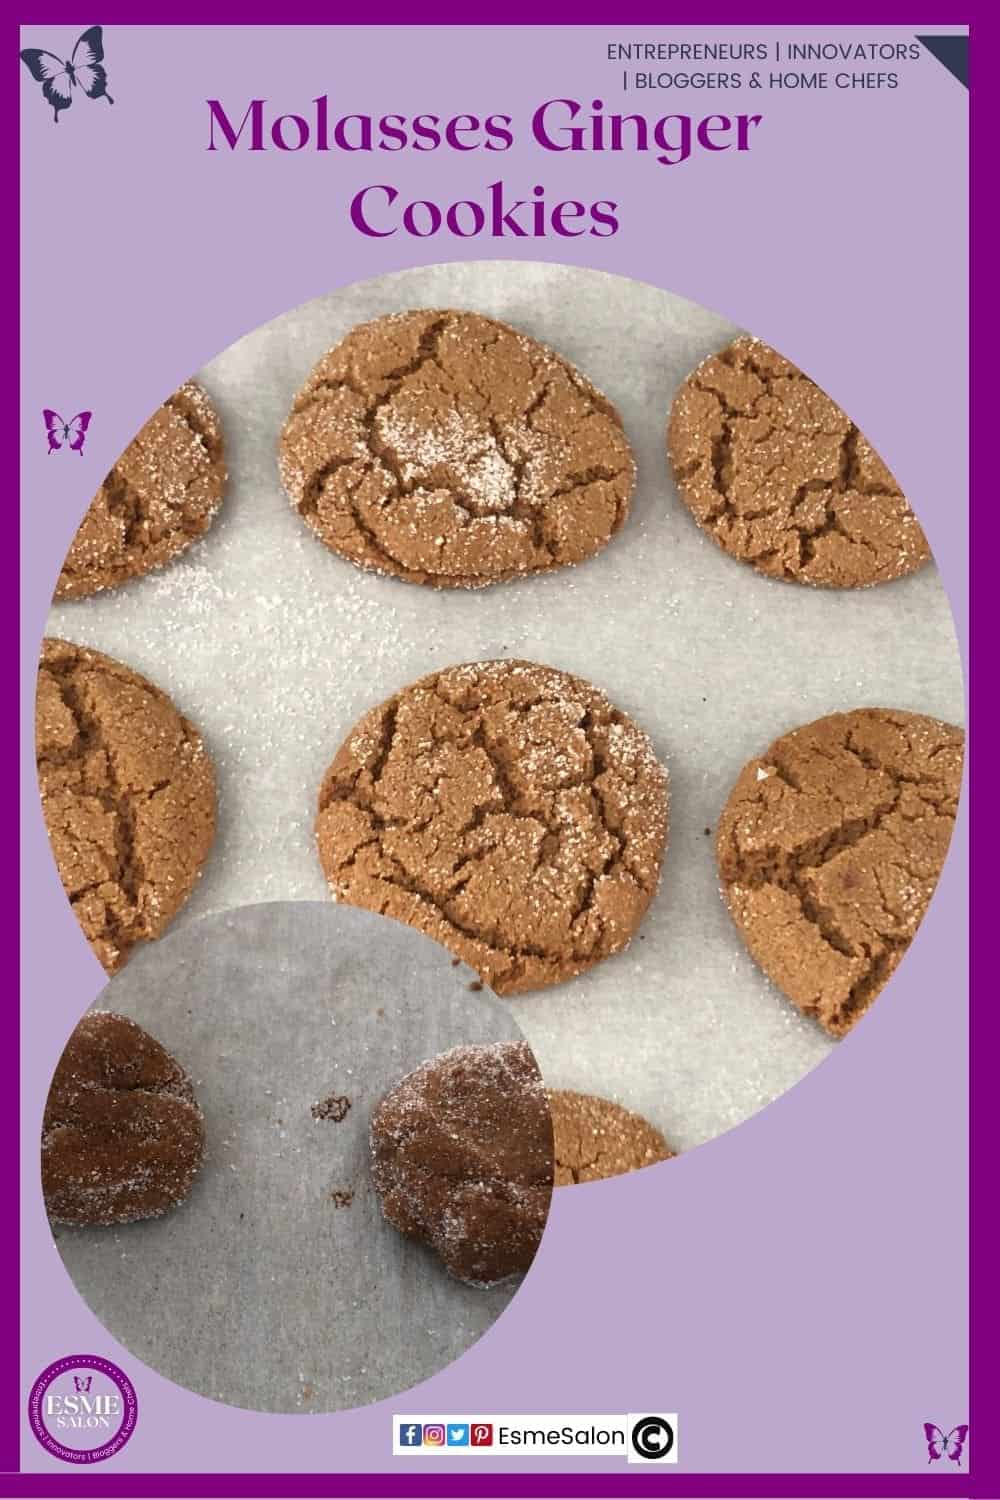 an image of Molasses Ginger Cookies baked and unbaked